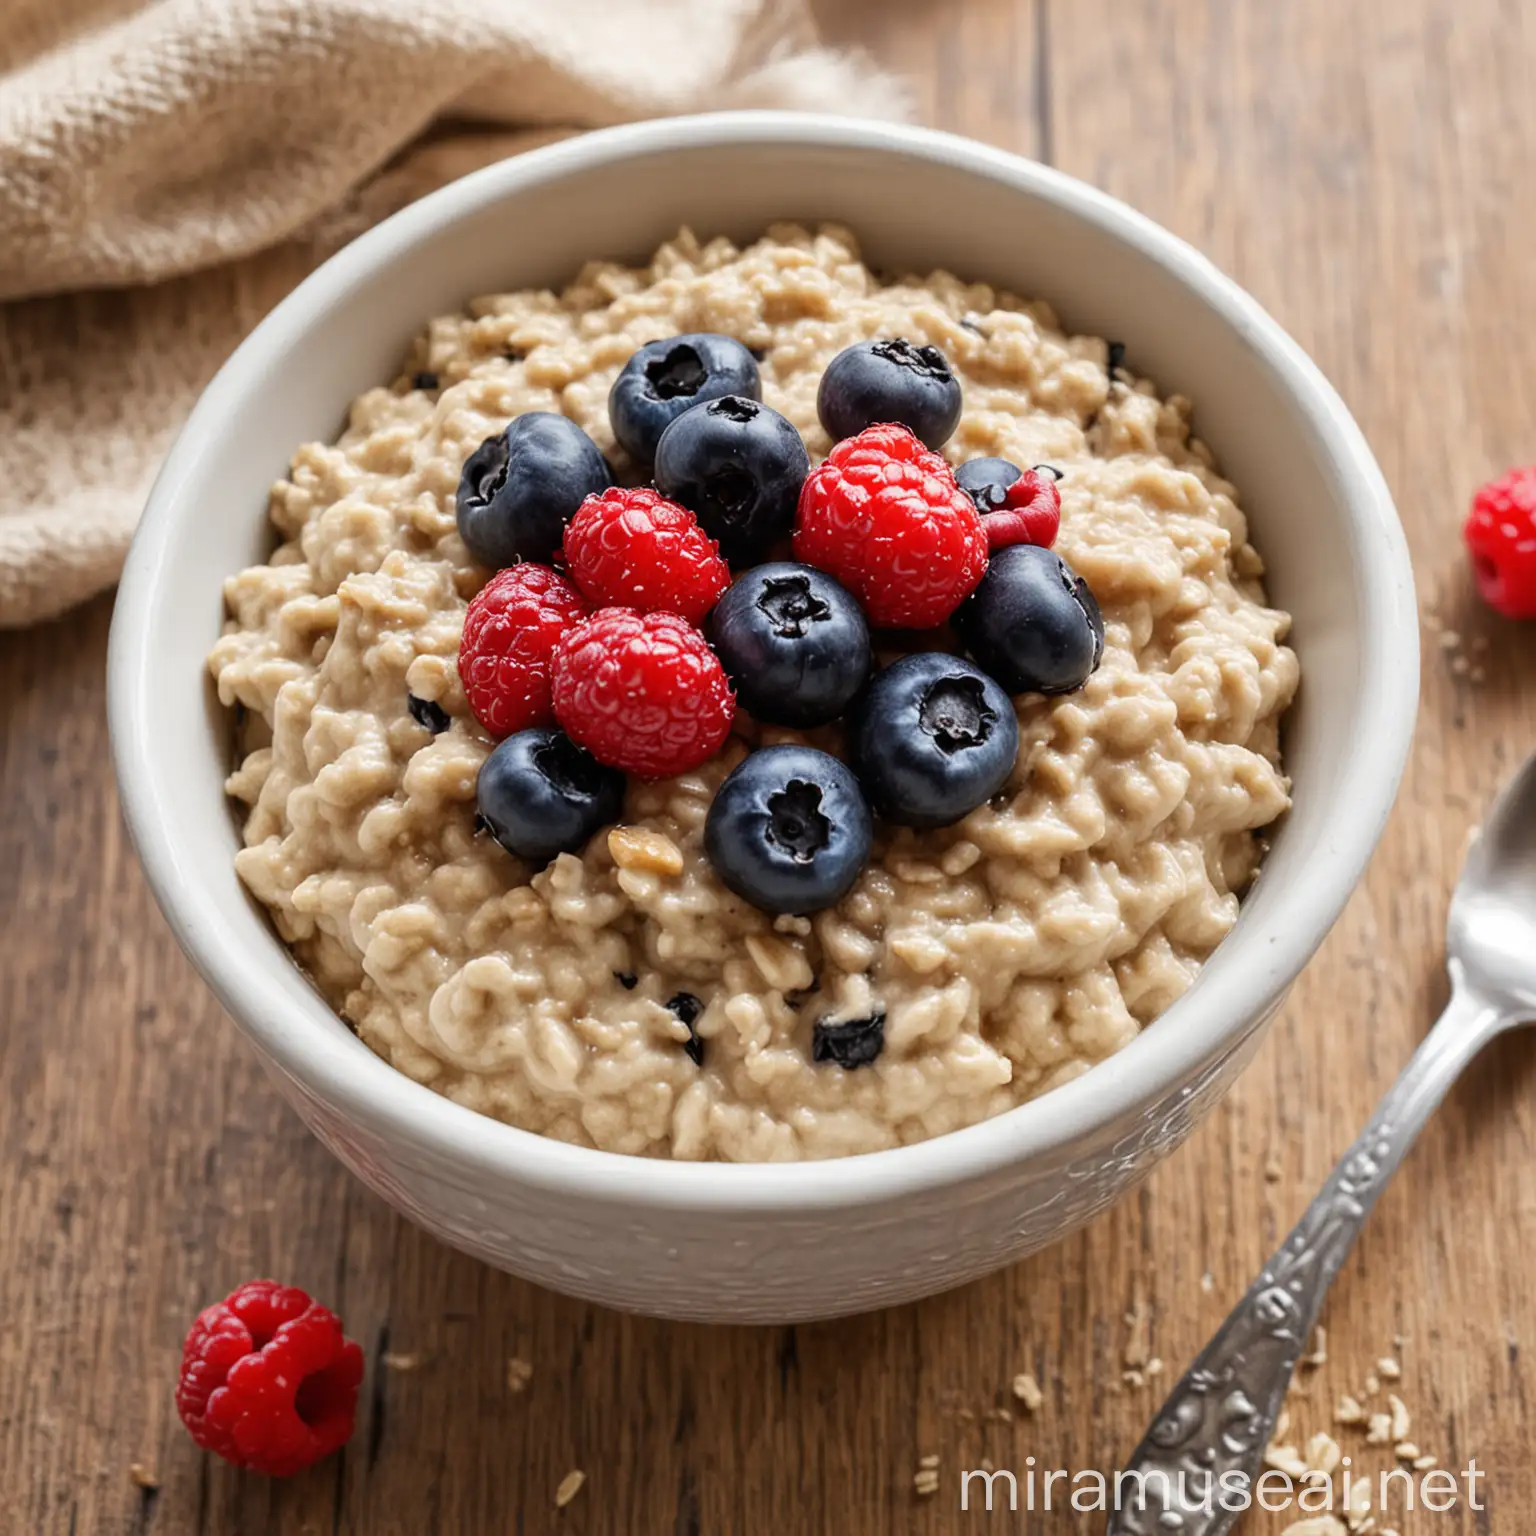 Delicious Oatmeal Breakfast with Fresh Berries Healthy and Nutritious Morning Meal